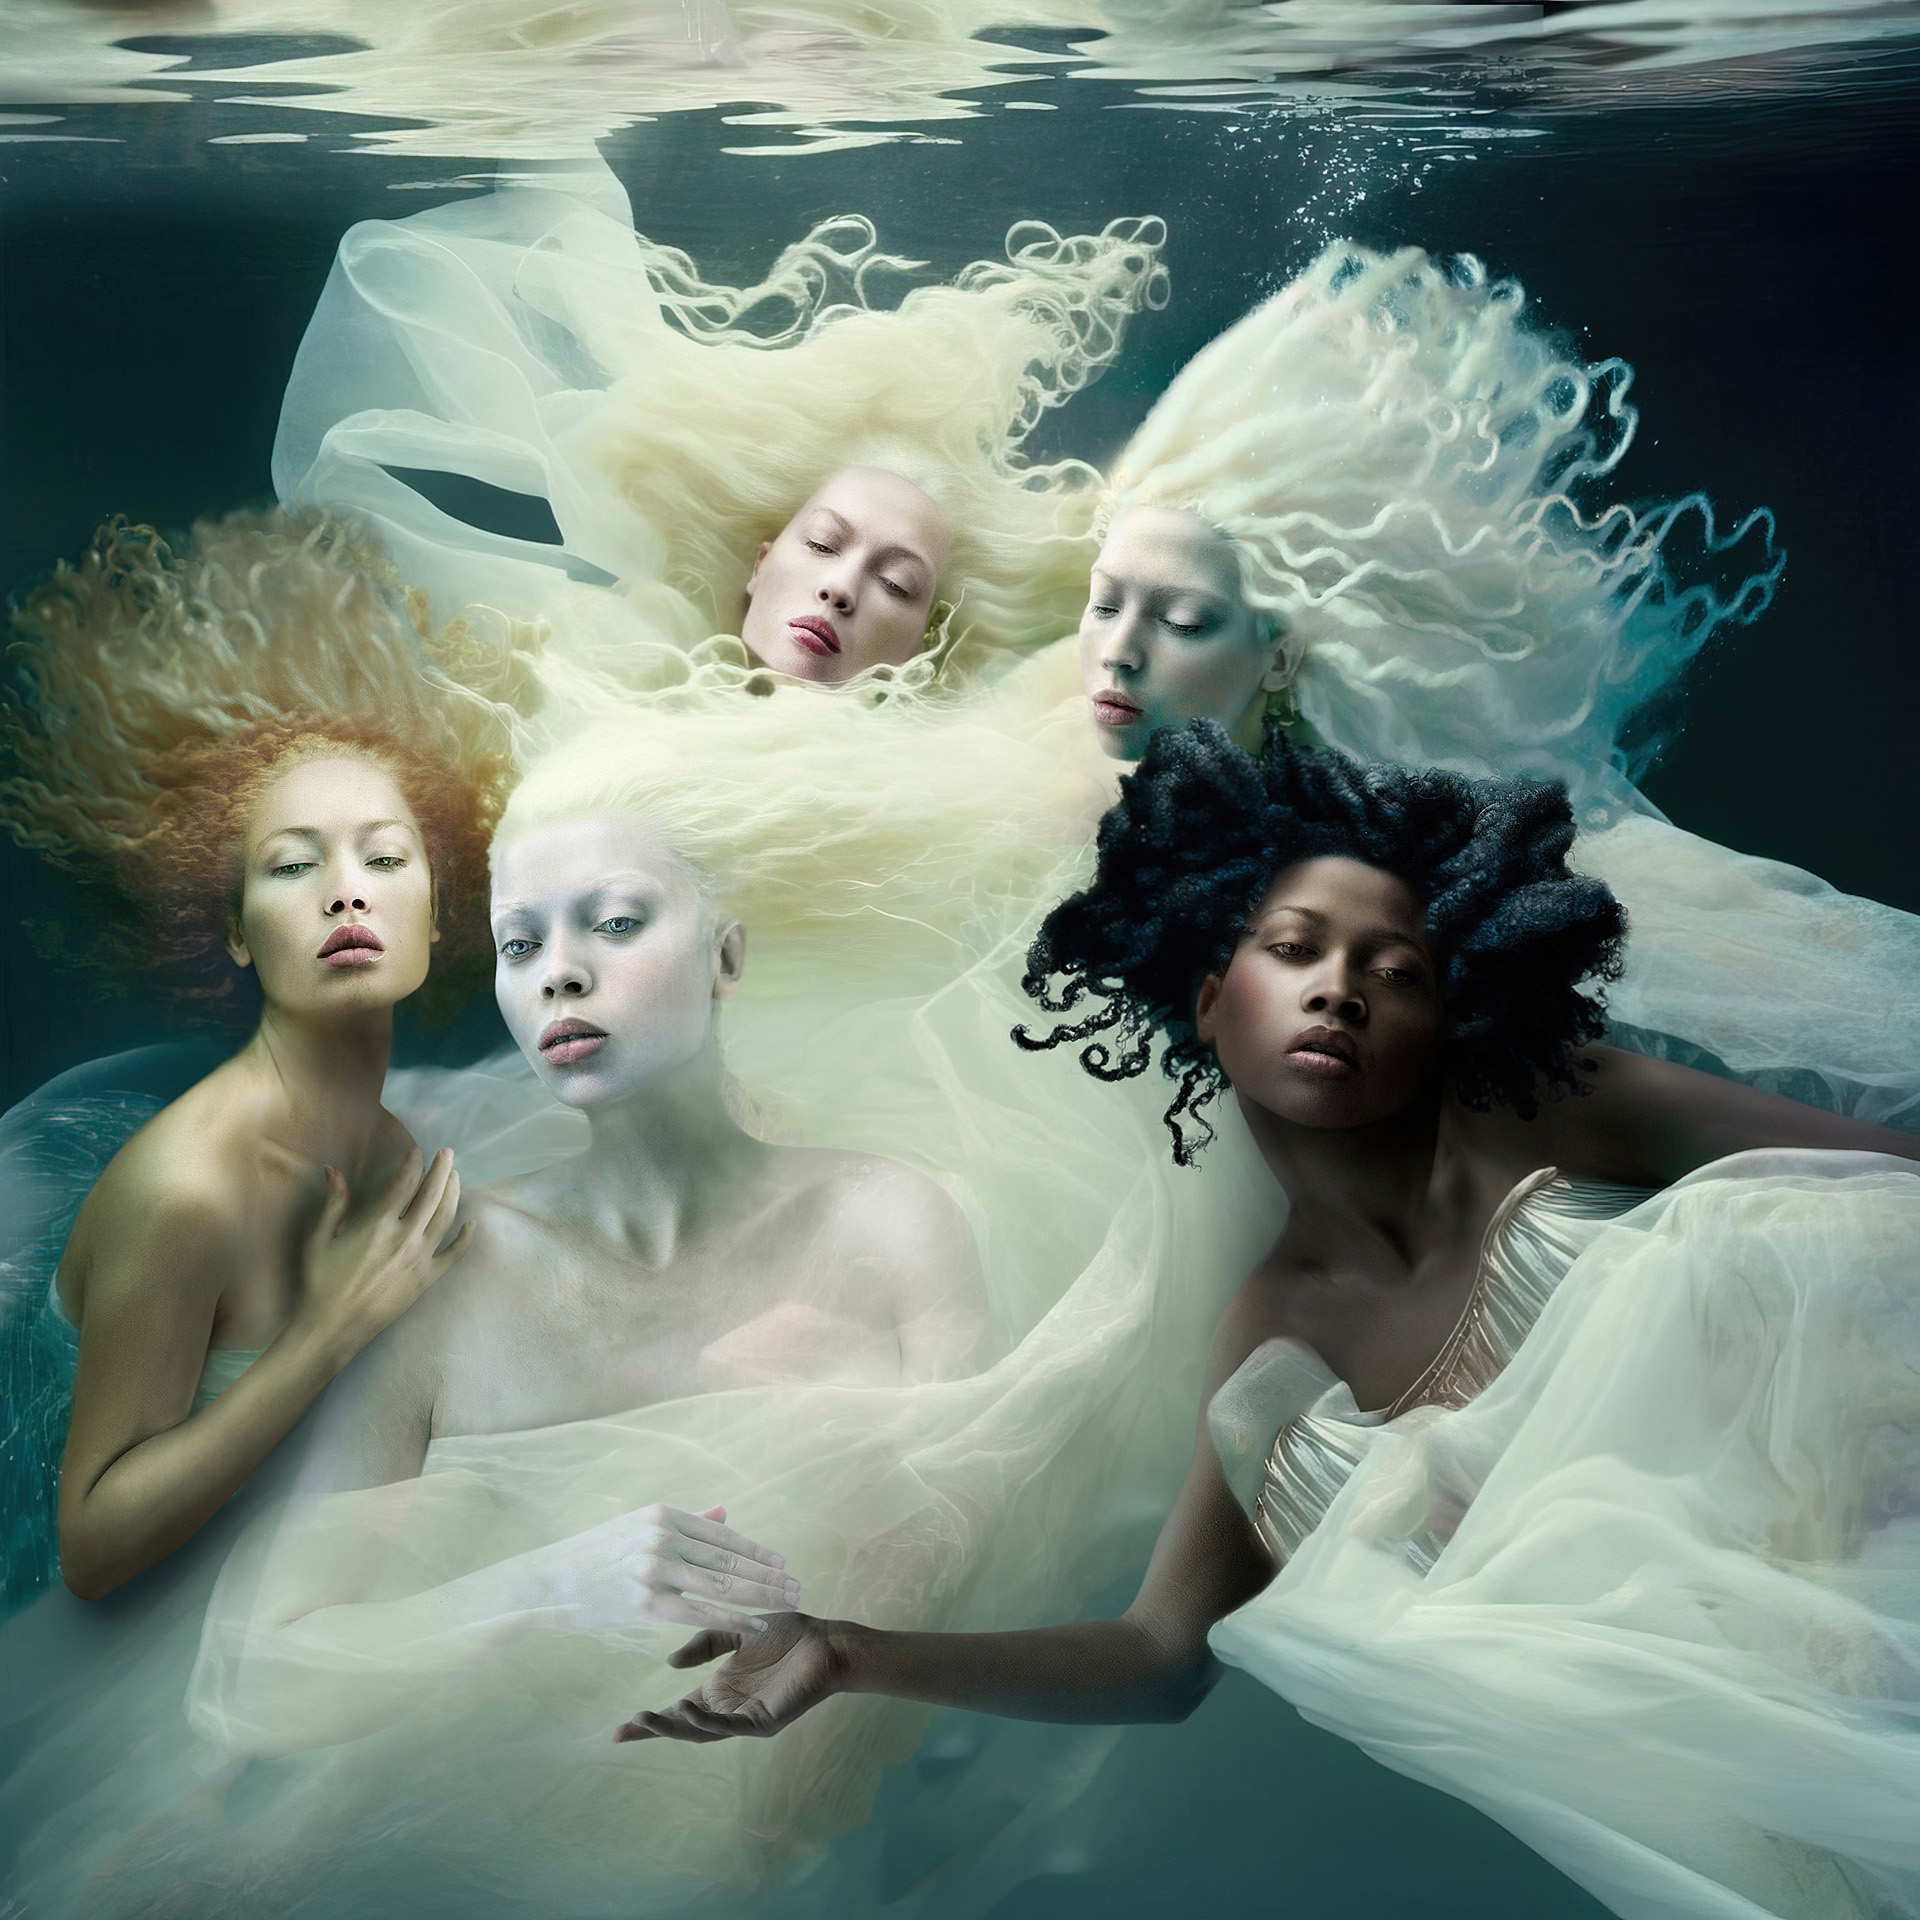 beauty of the albino community and women in general